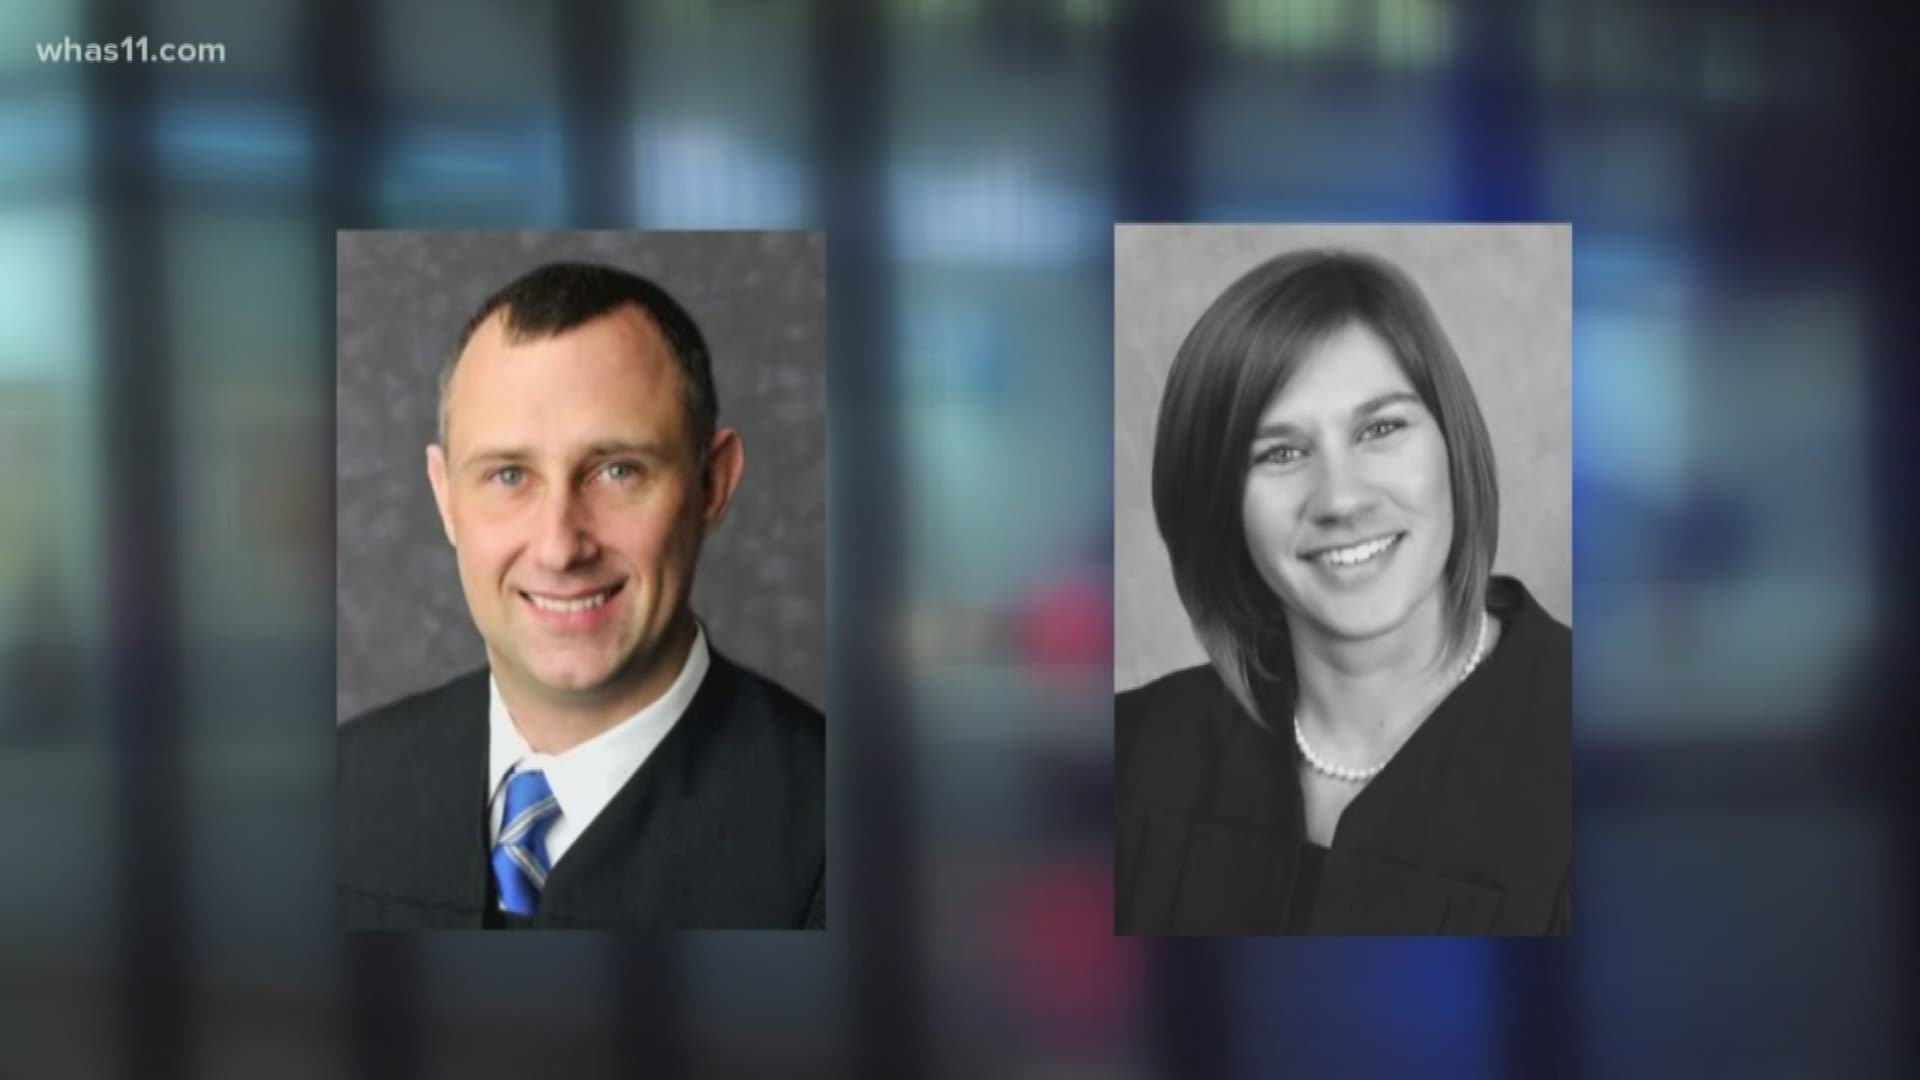 Clark County Circuit Court Judge Brad Jacobs and Crawford Circuit Judge Sabrina Bell were reinstated to the bench Monday.